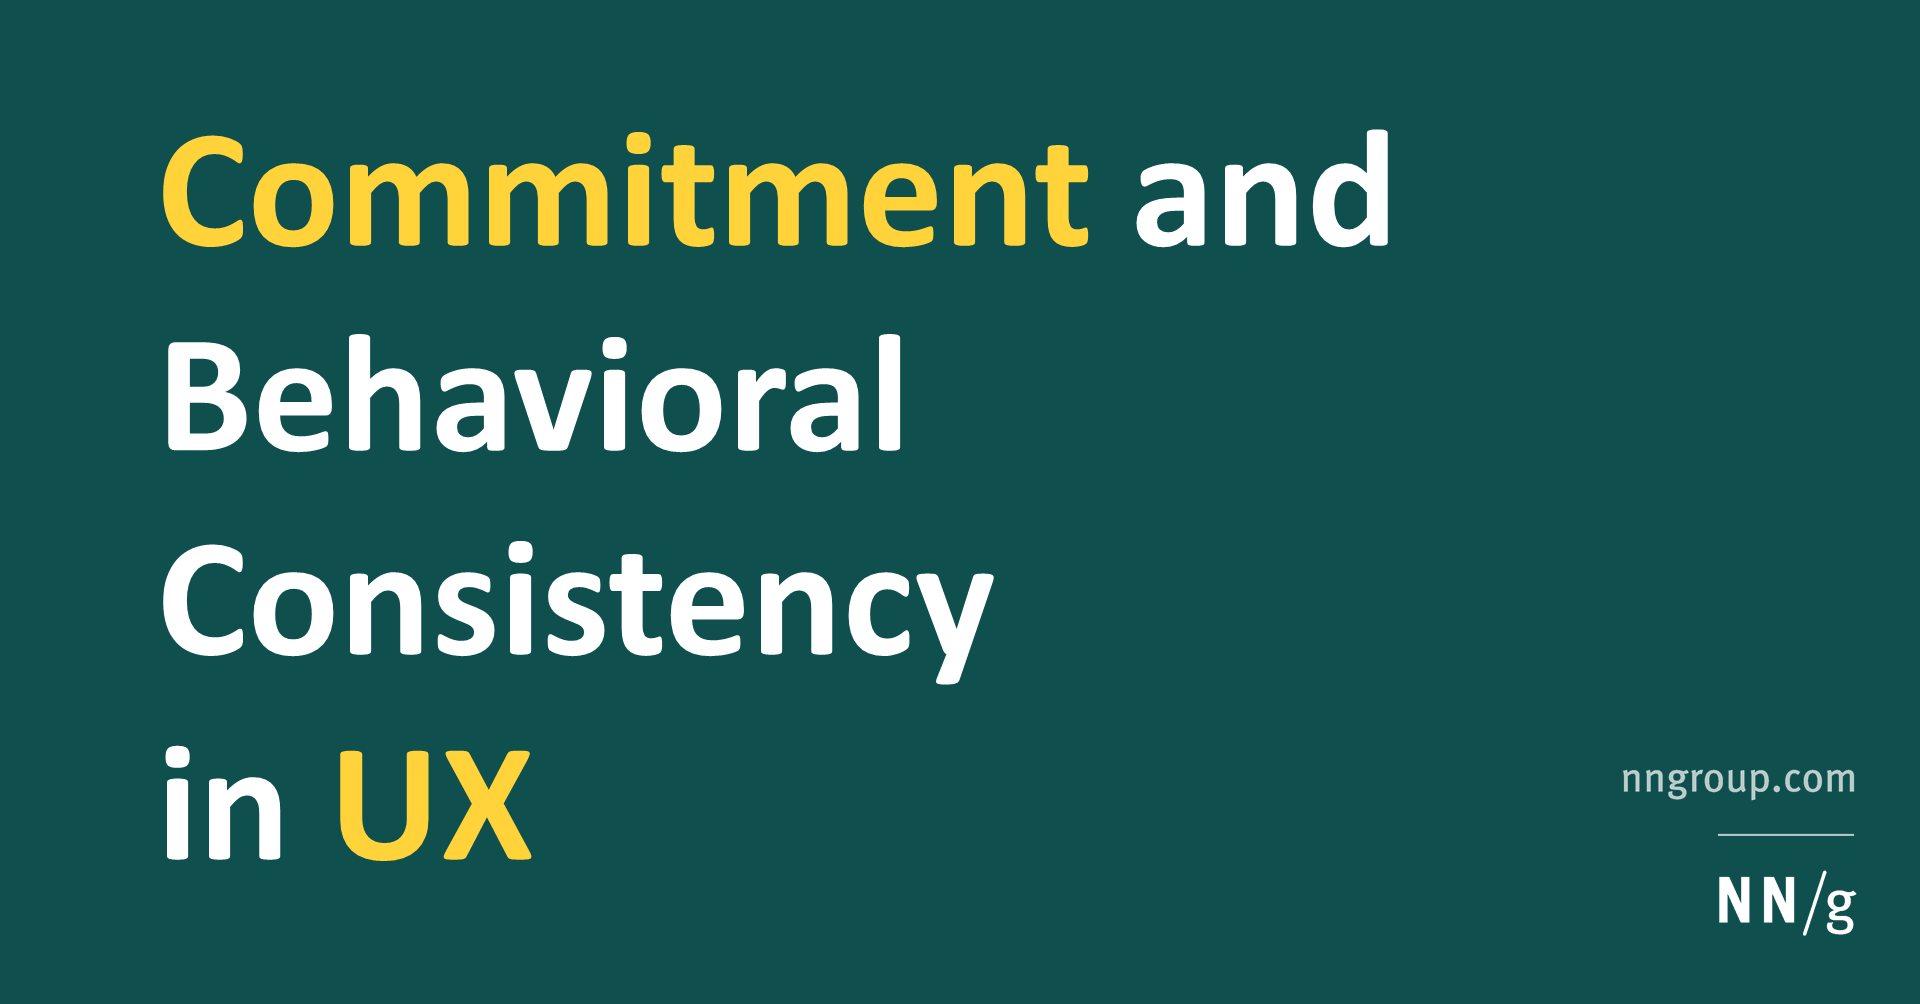 The Principle of Commitment and Behavioral Consistency